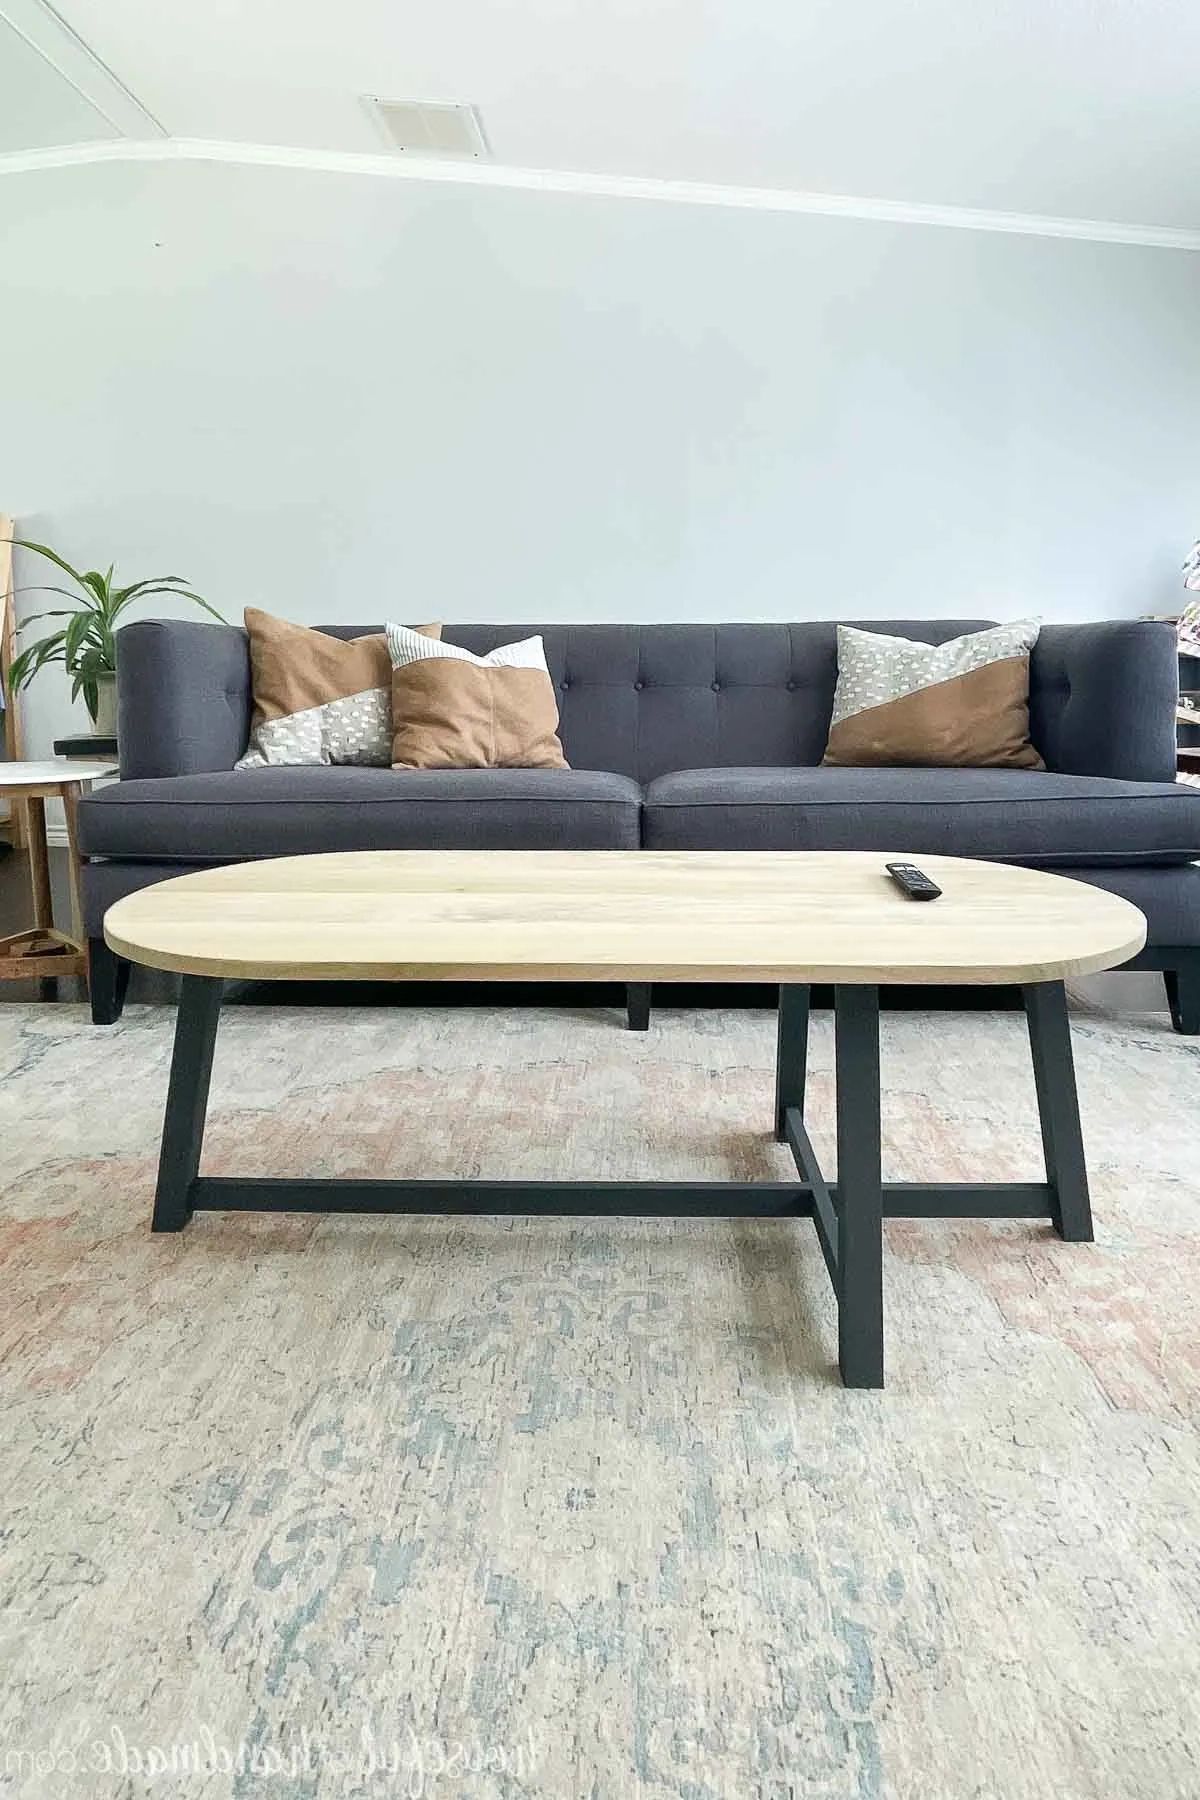 Preferred Simple Design Coffee Tables For Simple Asymmetrical Coffee Table Build Plans – Houseful Of Handmade (View 6 of 10)